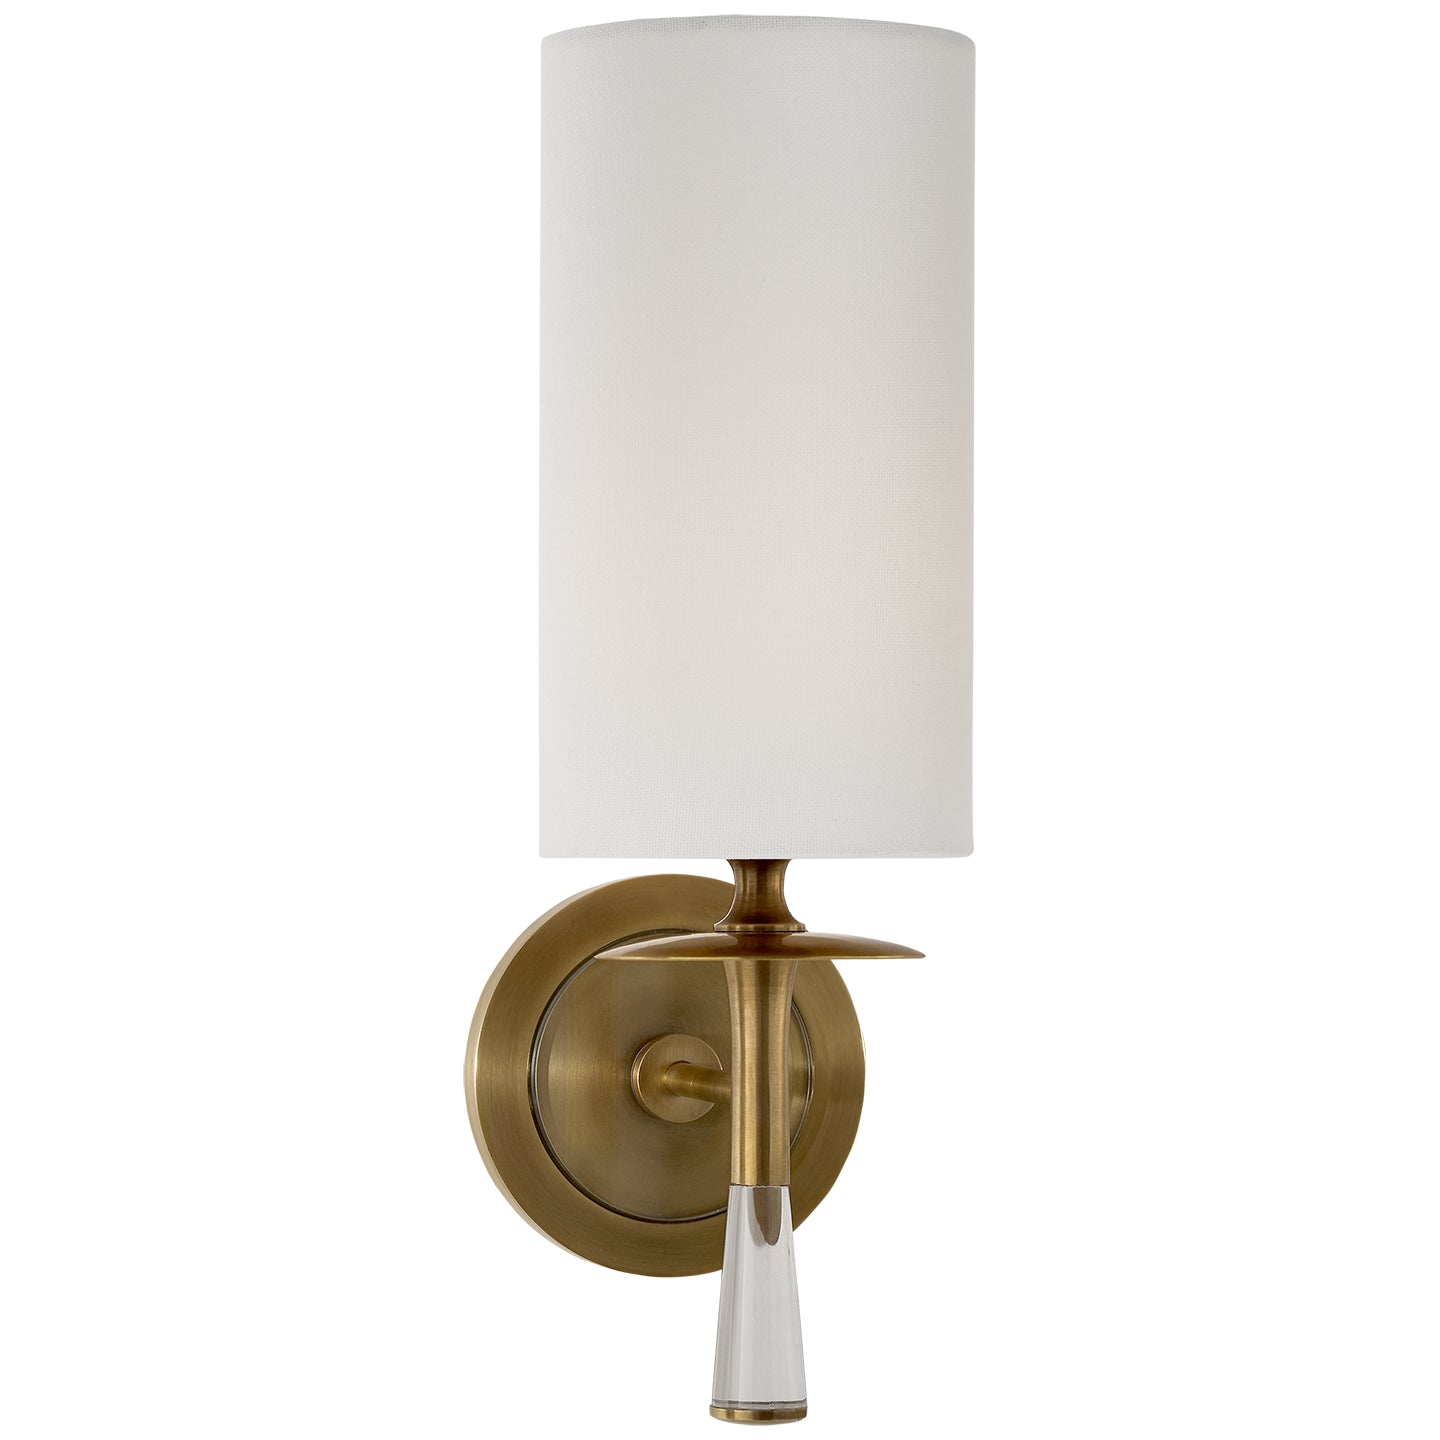 Visual Comfort Signature - ARN 2018HAB/CG-L - One Light Wall Sconce - drunmore - Hand-Rubbed Antique Brass with Crystal